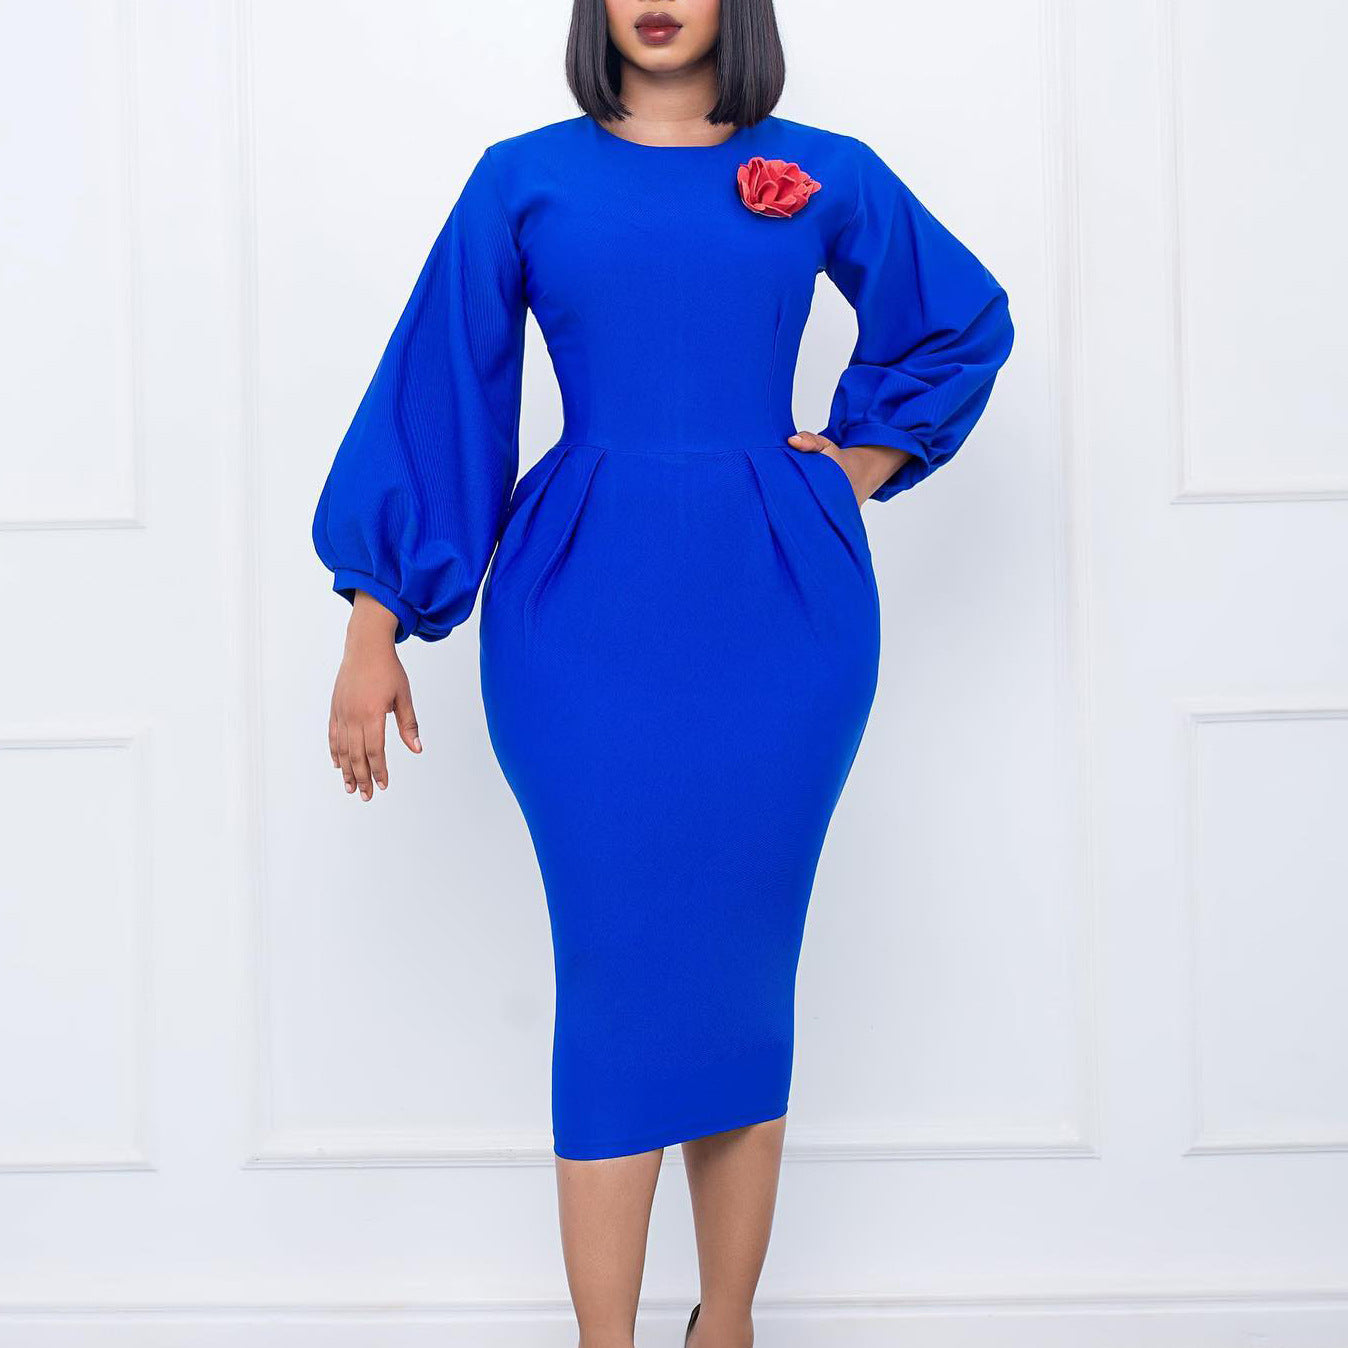 BamBam Women's Fall Winter Solid Color Bodycon Pro Ol Chic Plus Size African Dress - BamBam